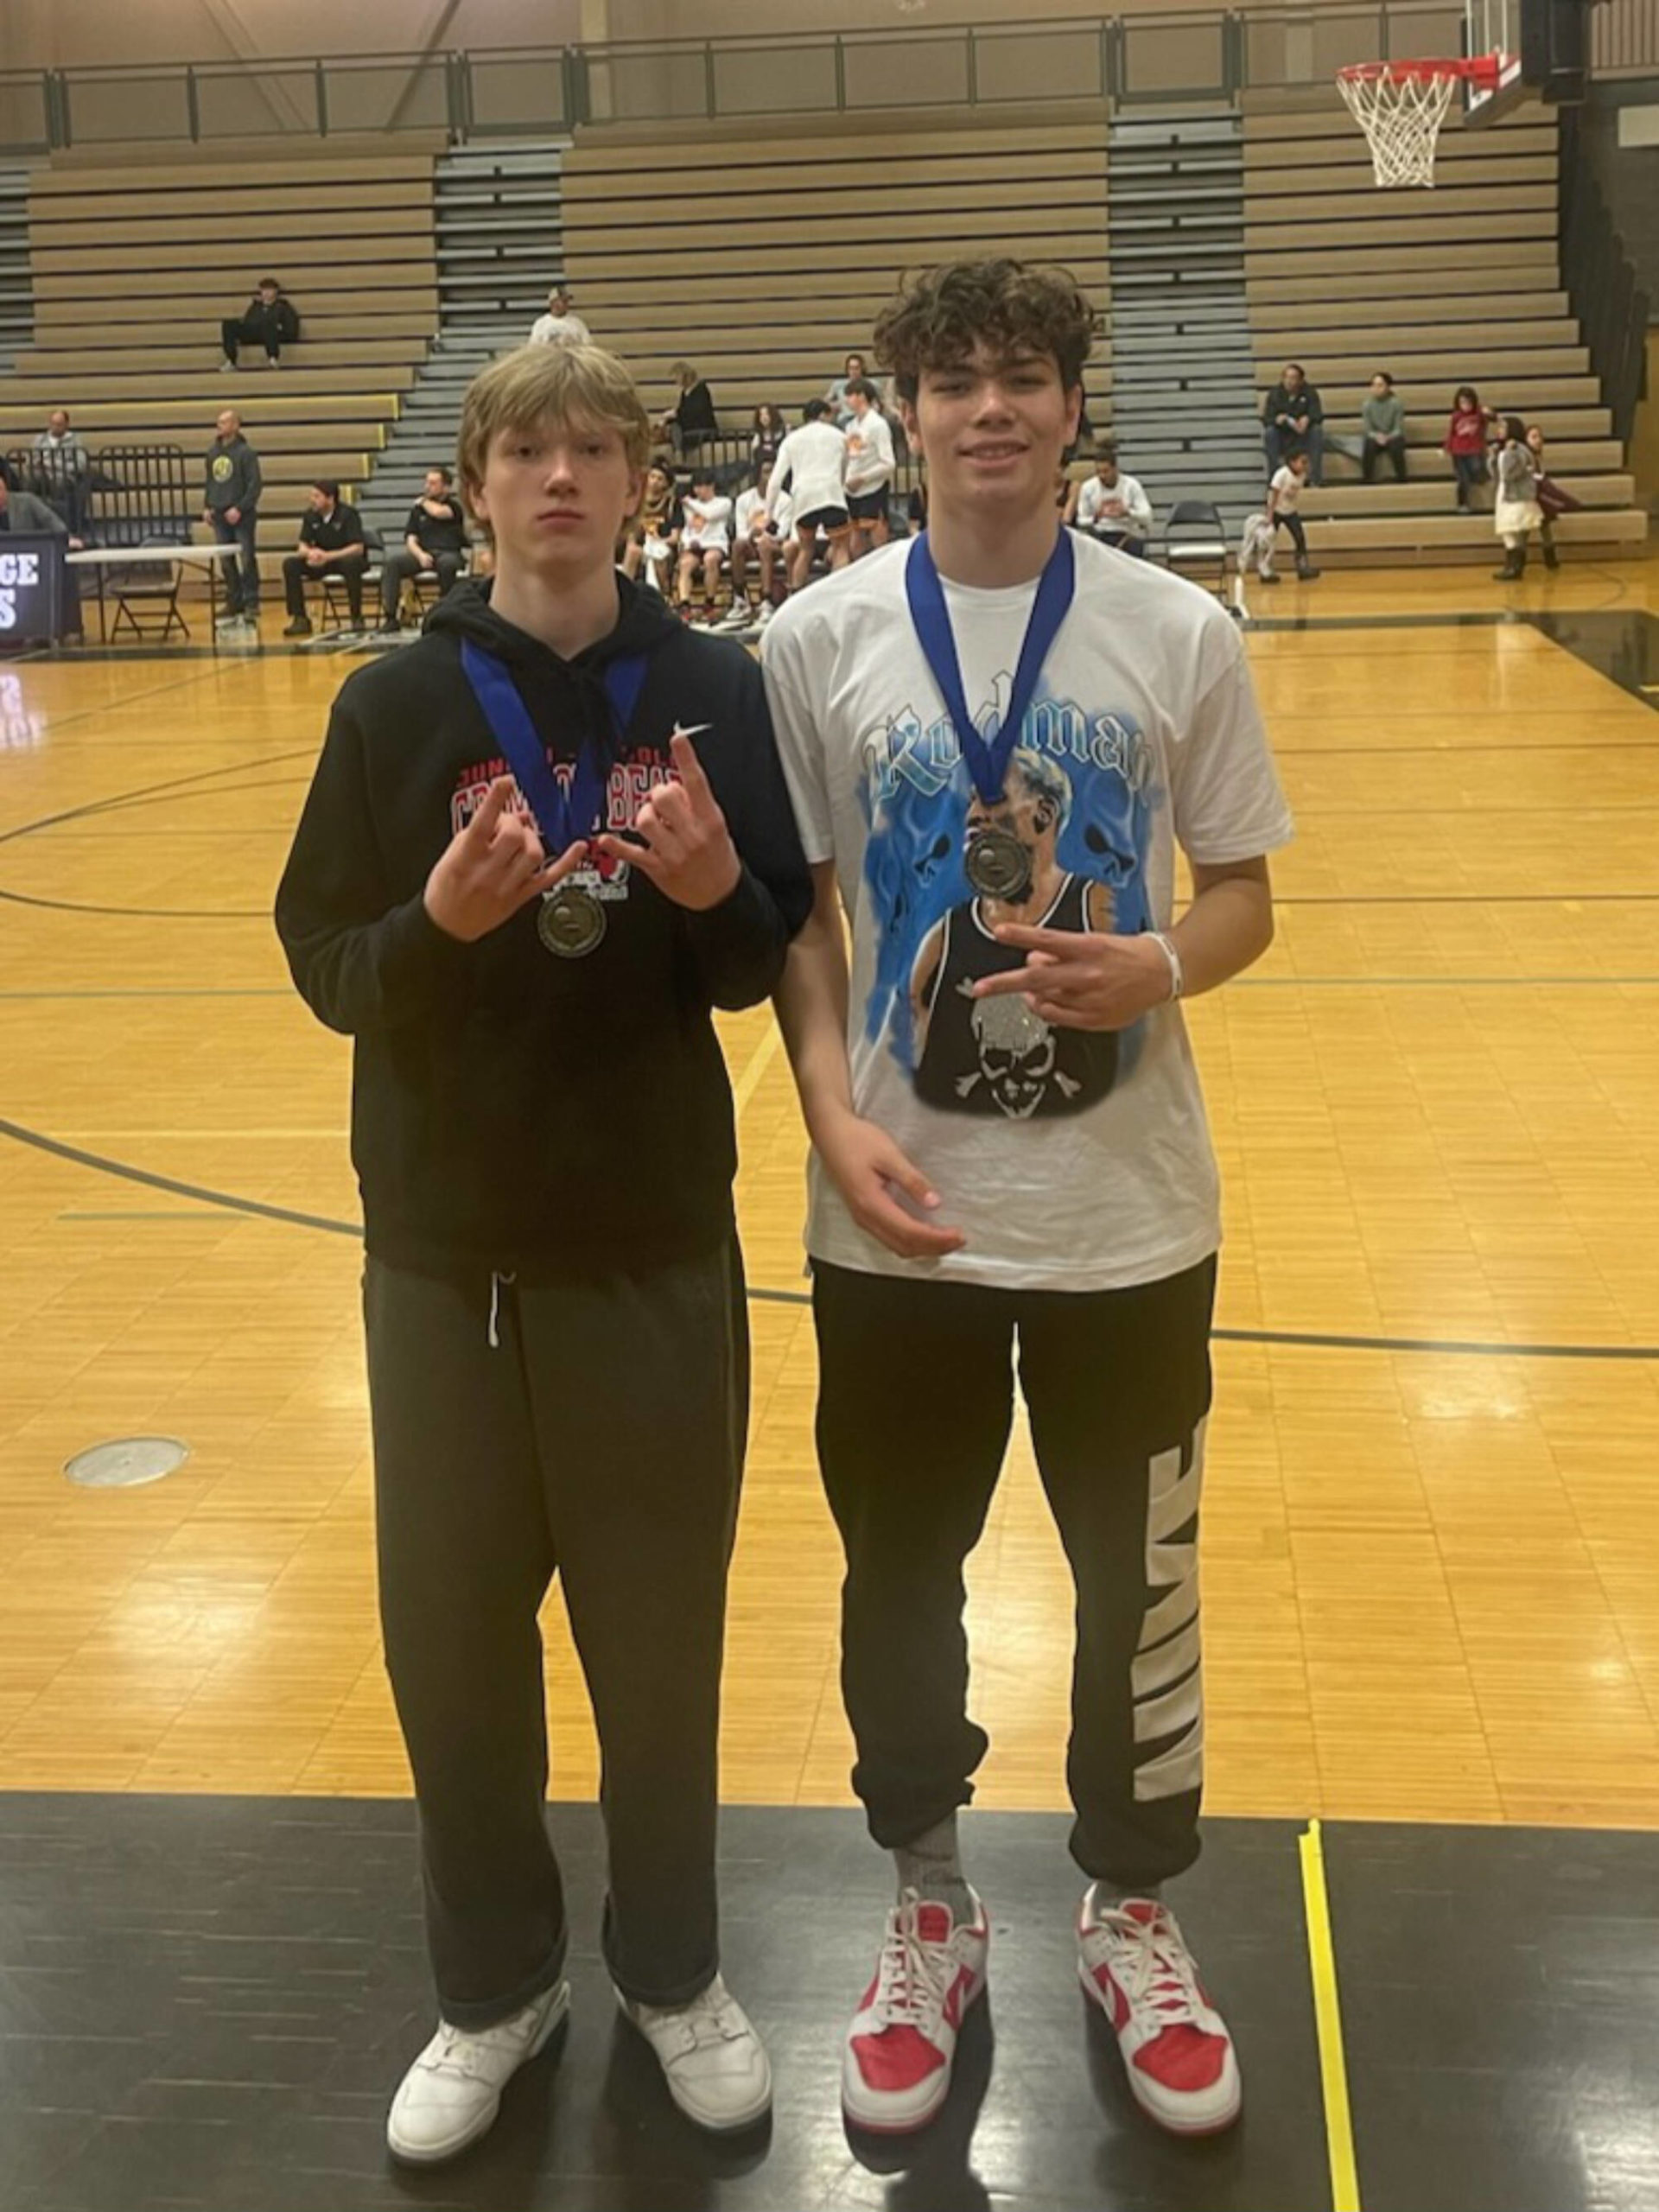 JDHS junior Sean Oliver and senior Orion Dybdahl pose for a photo on Saturday after earning all-tournament honors at the O’Brady Invitational tournament in South Anchorage. (Courtesy Photo / Robert Casperson)